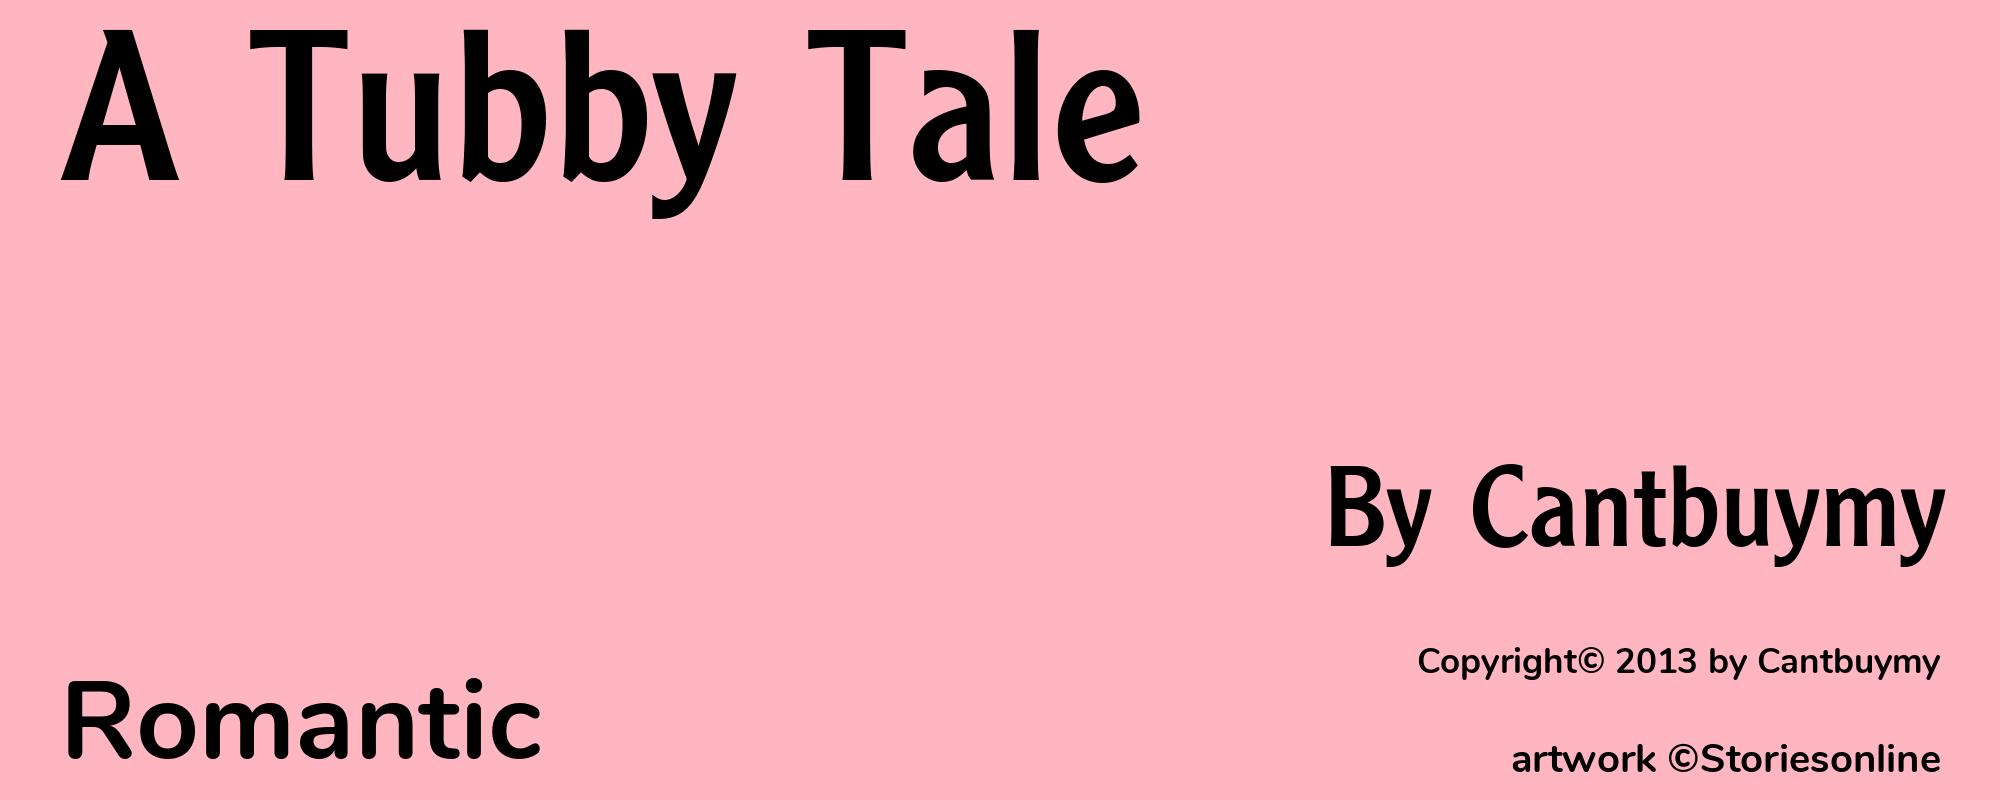 A Tubby Tale - Cover